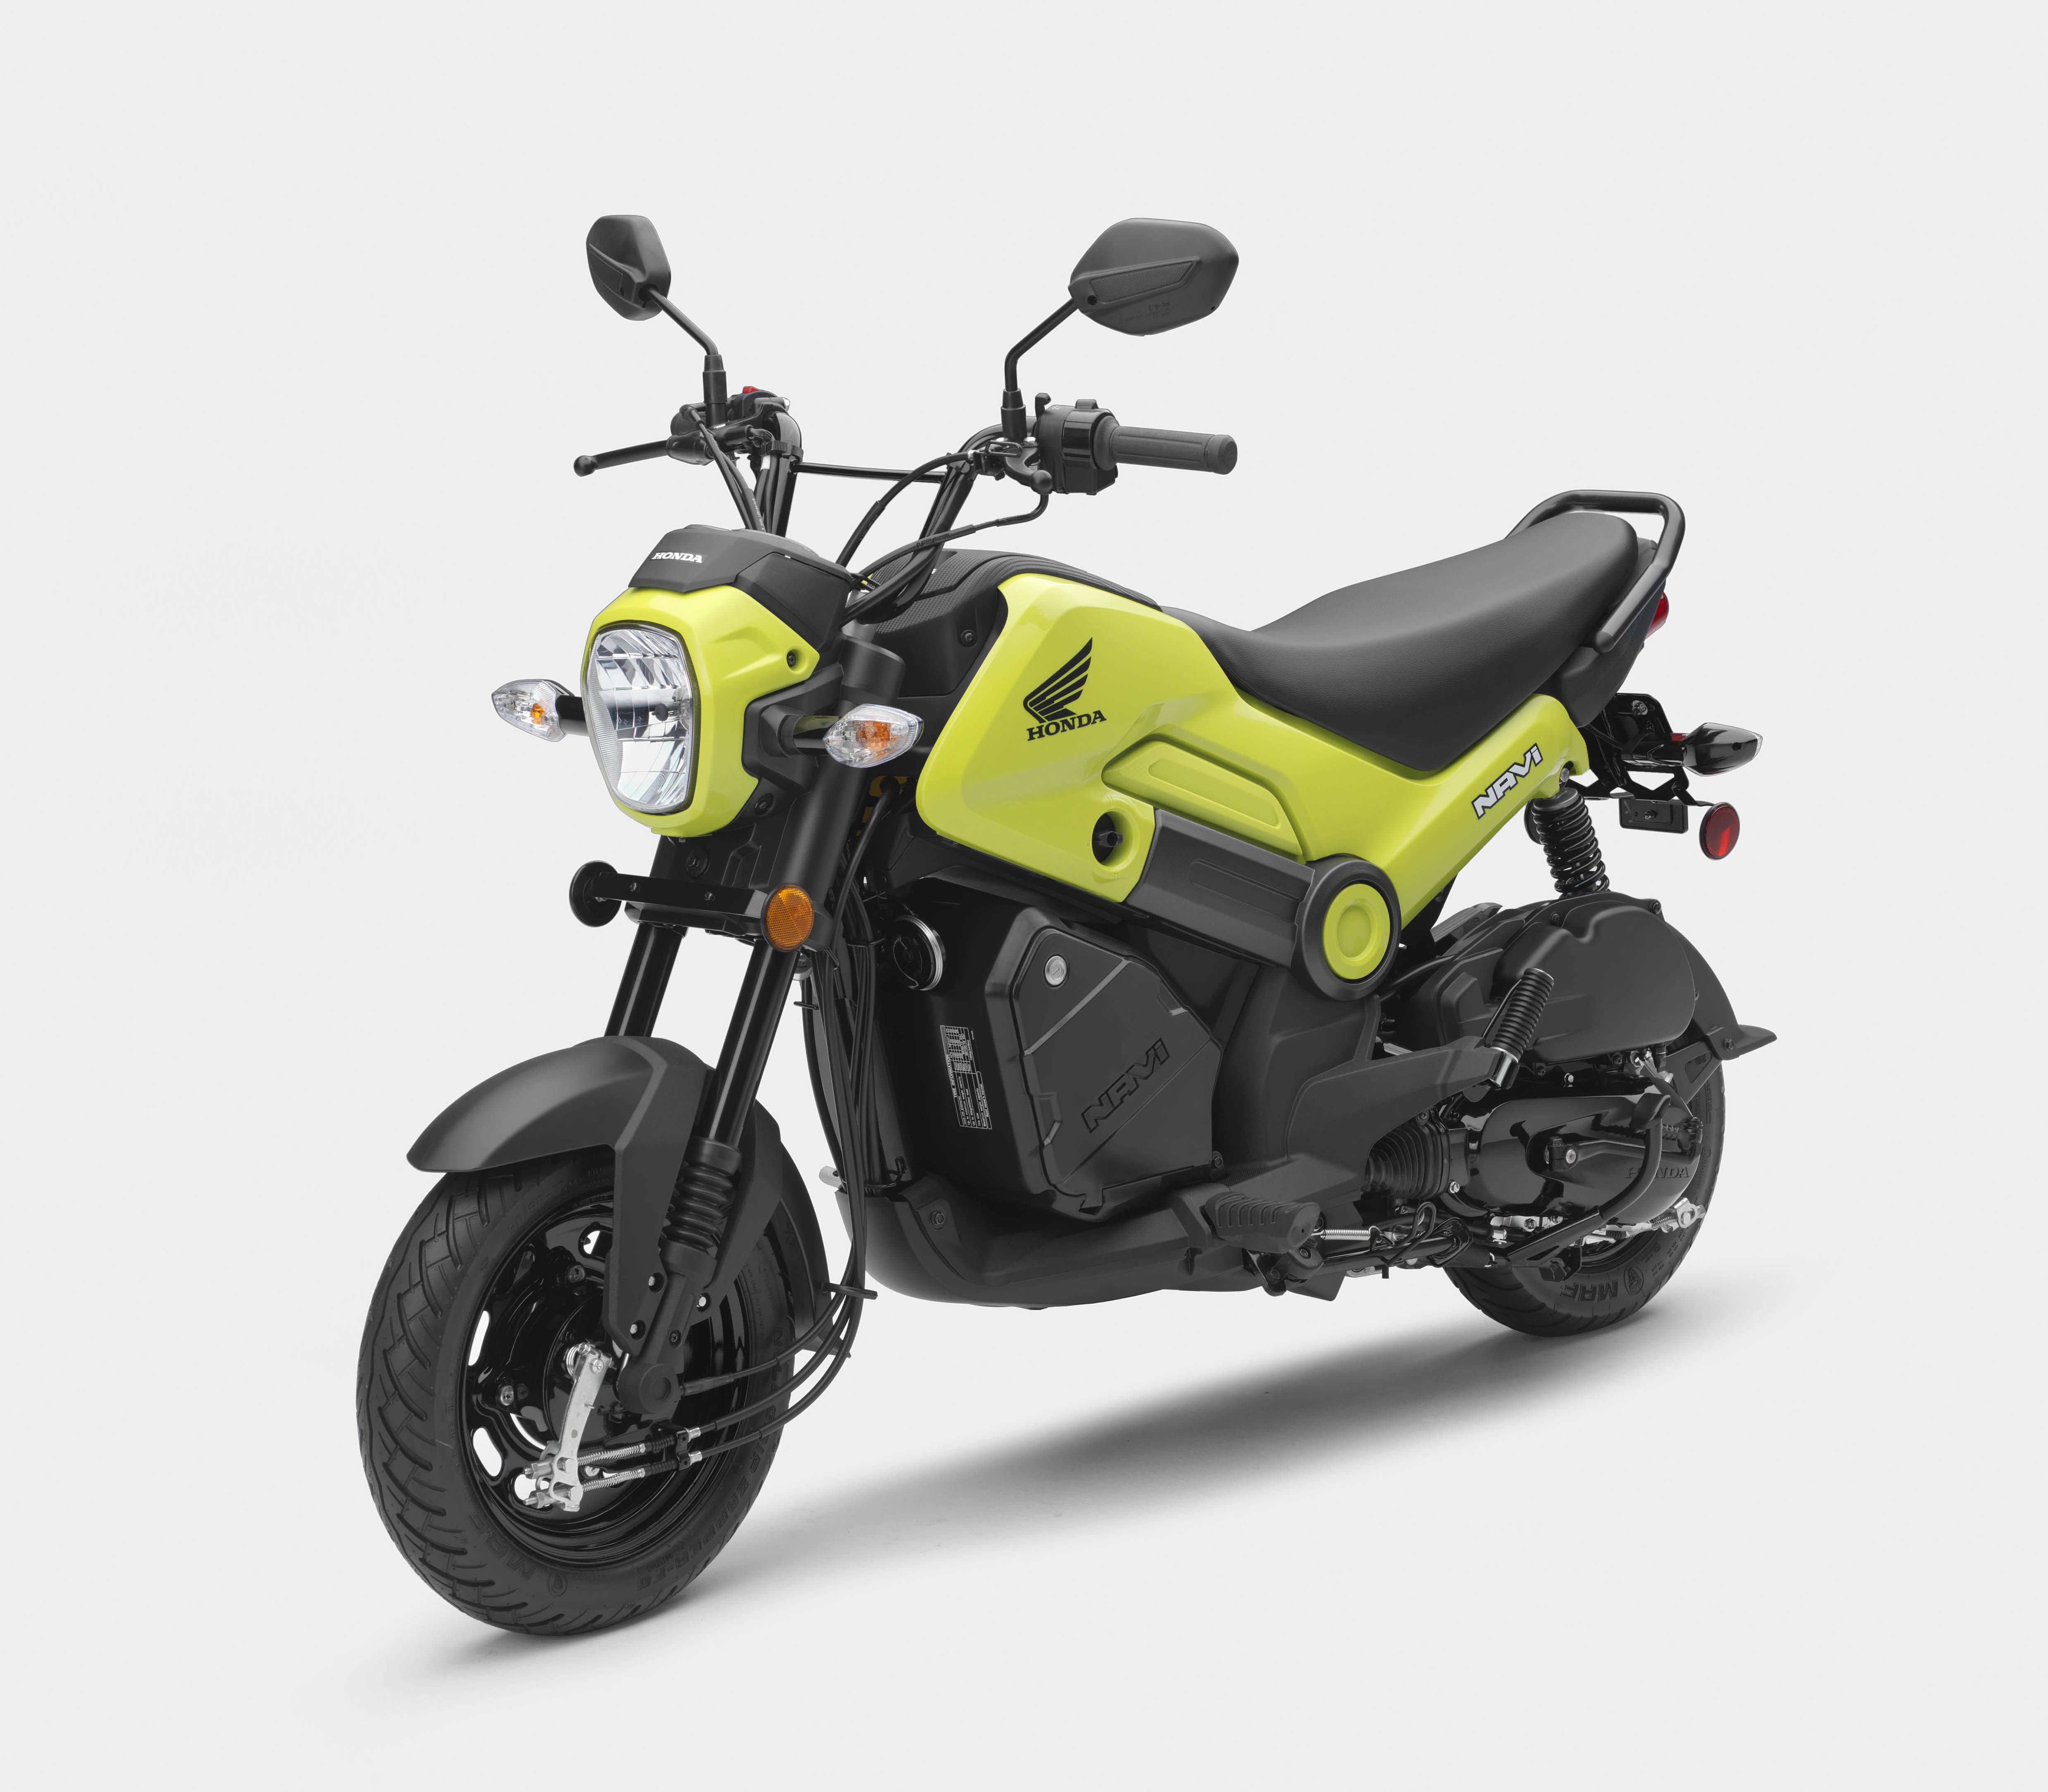 The smallest of Honda’s miniMOTO family scores the lowest—a mere 110 mpg, sorry.